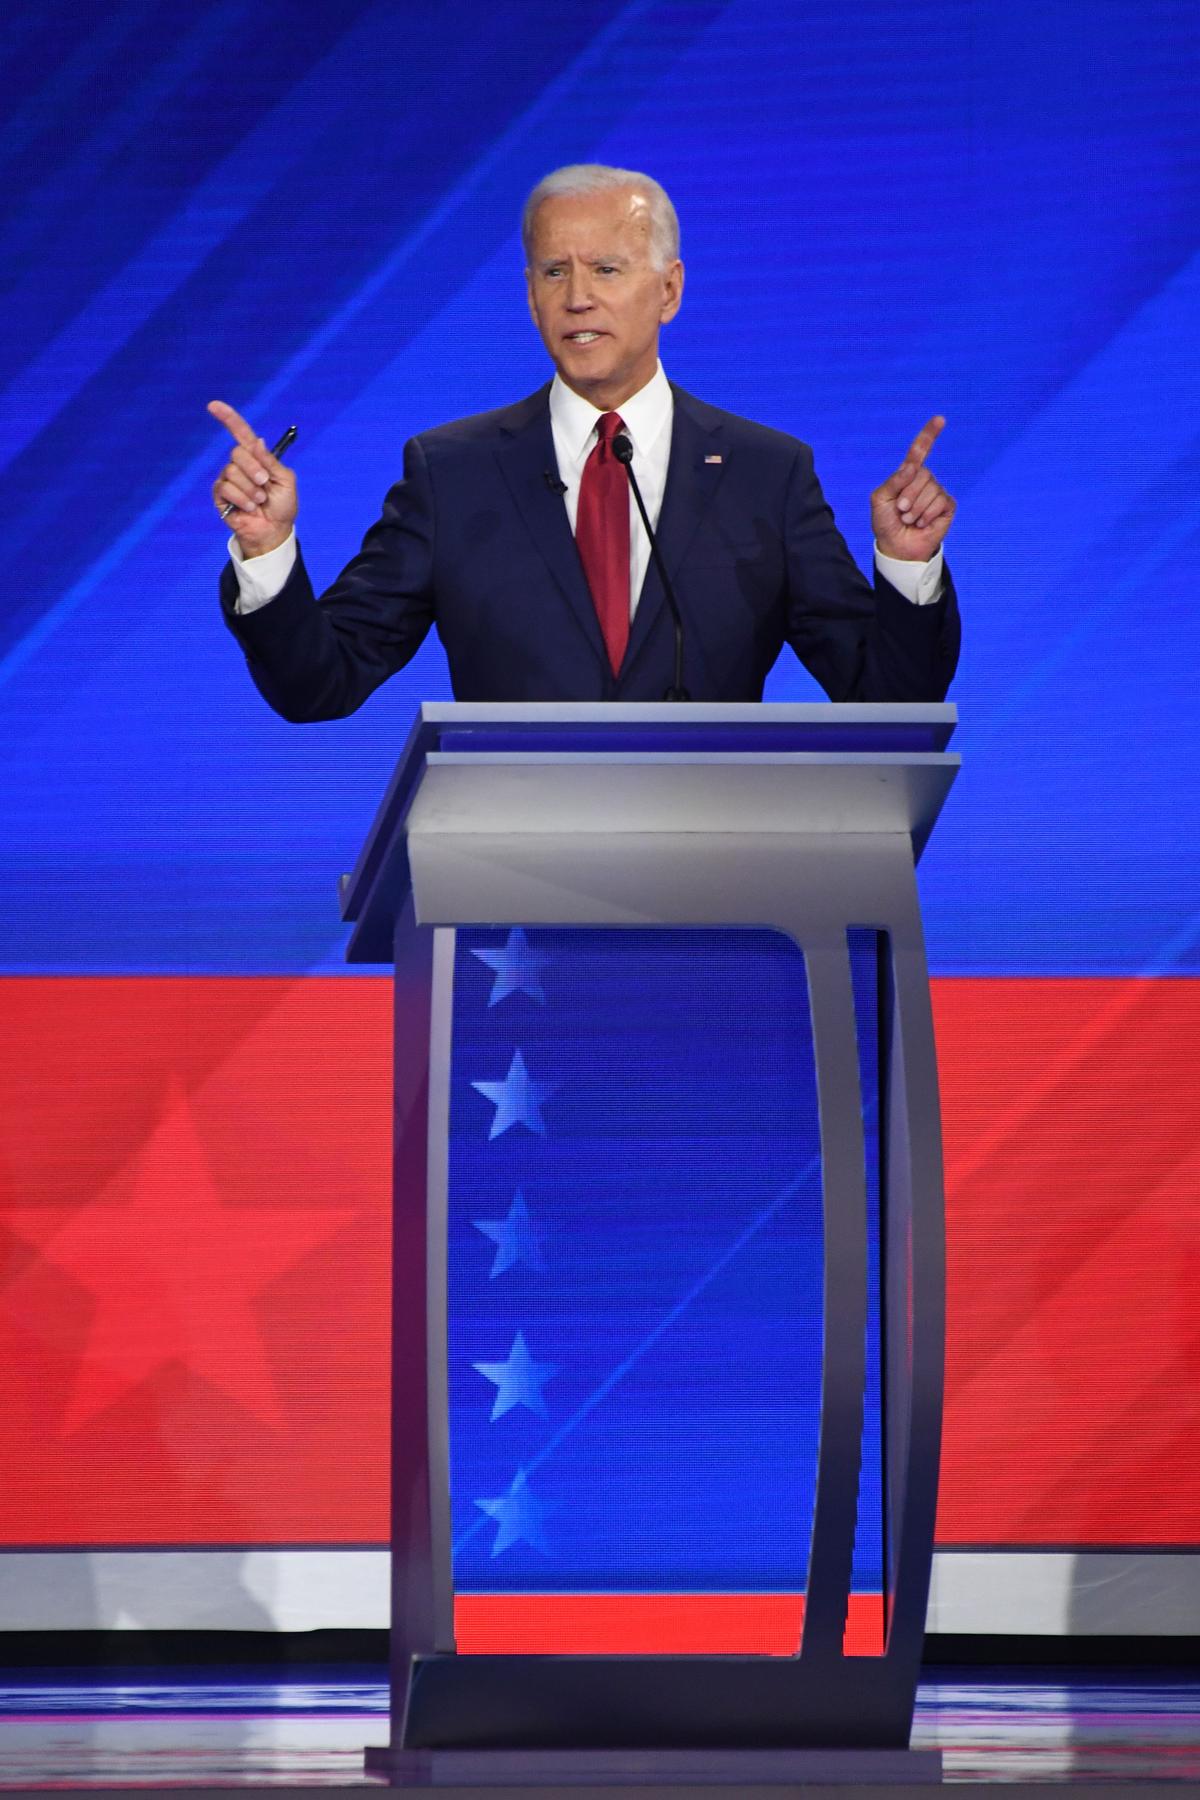 Democratic presidential candidate former vice president Joe Biden speaks during the 2020 presidential debate on Sept. 12, 2019. (Robyn Beck/Getty Images)